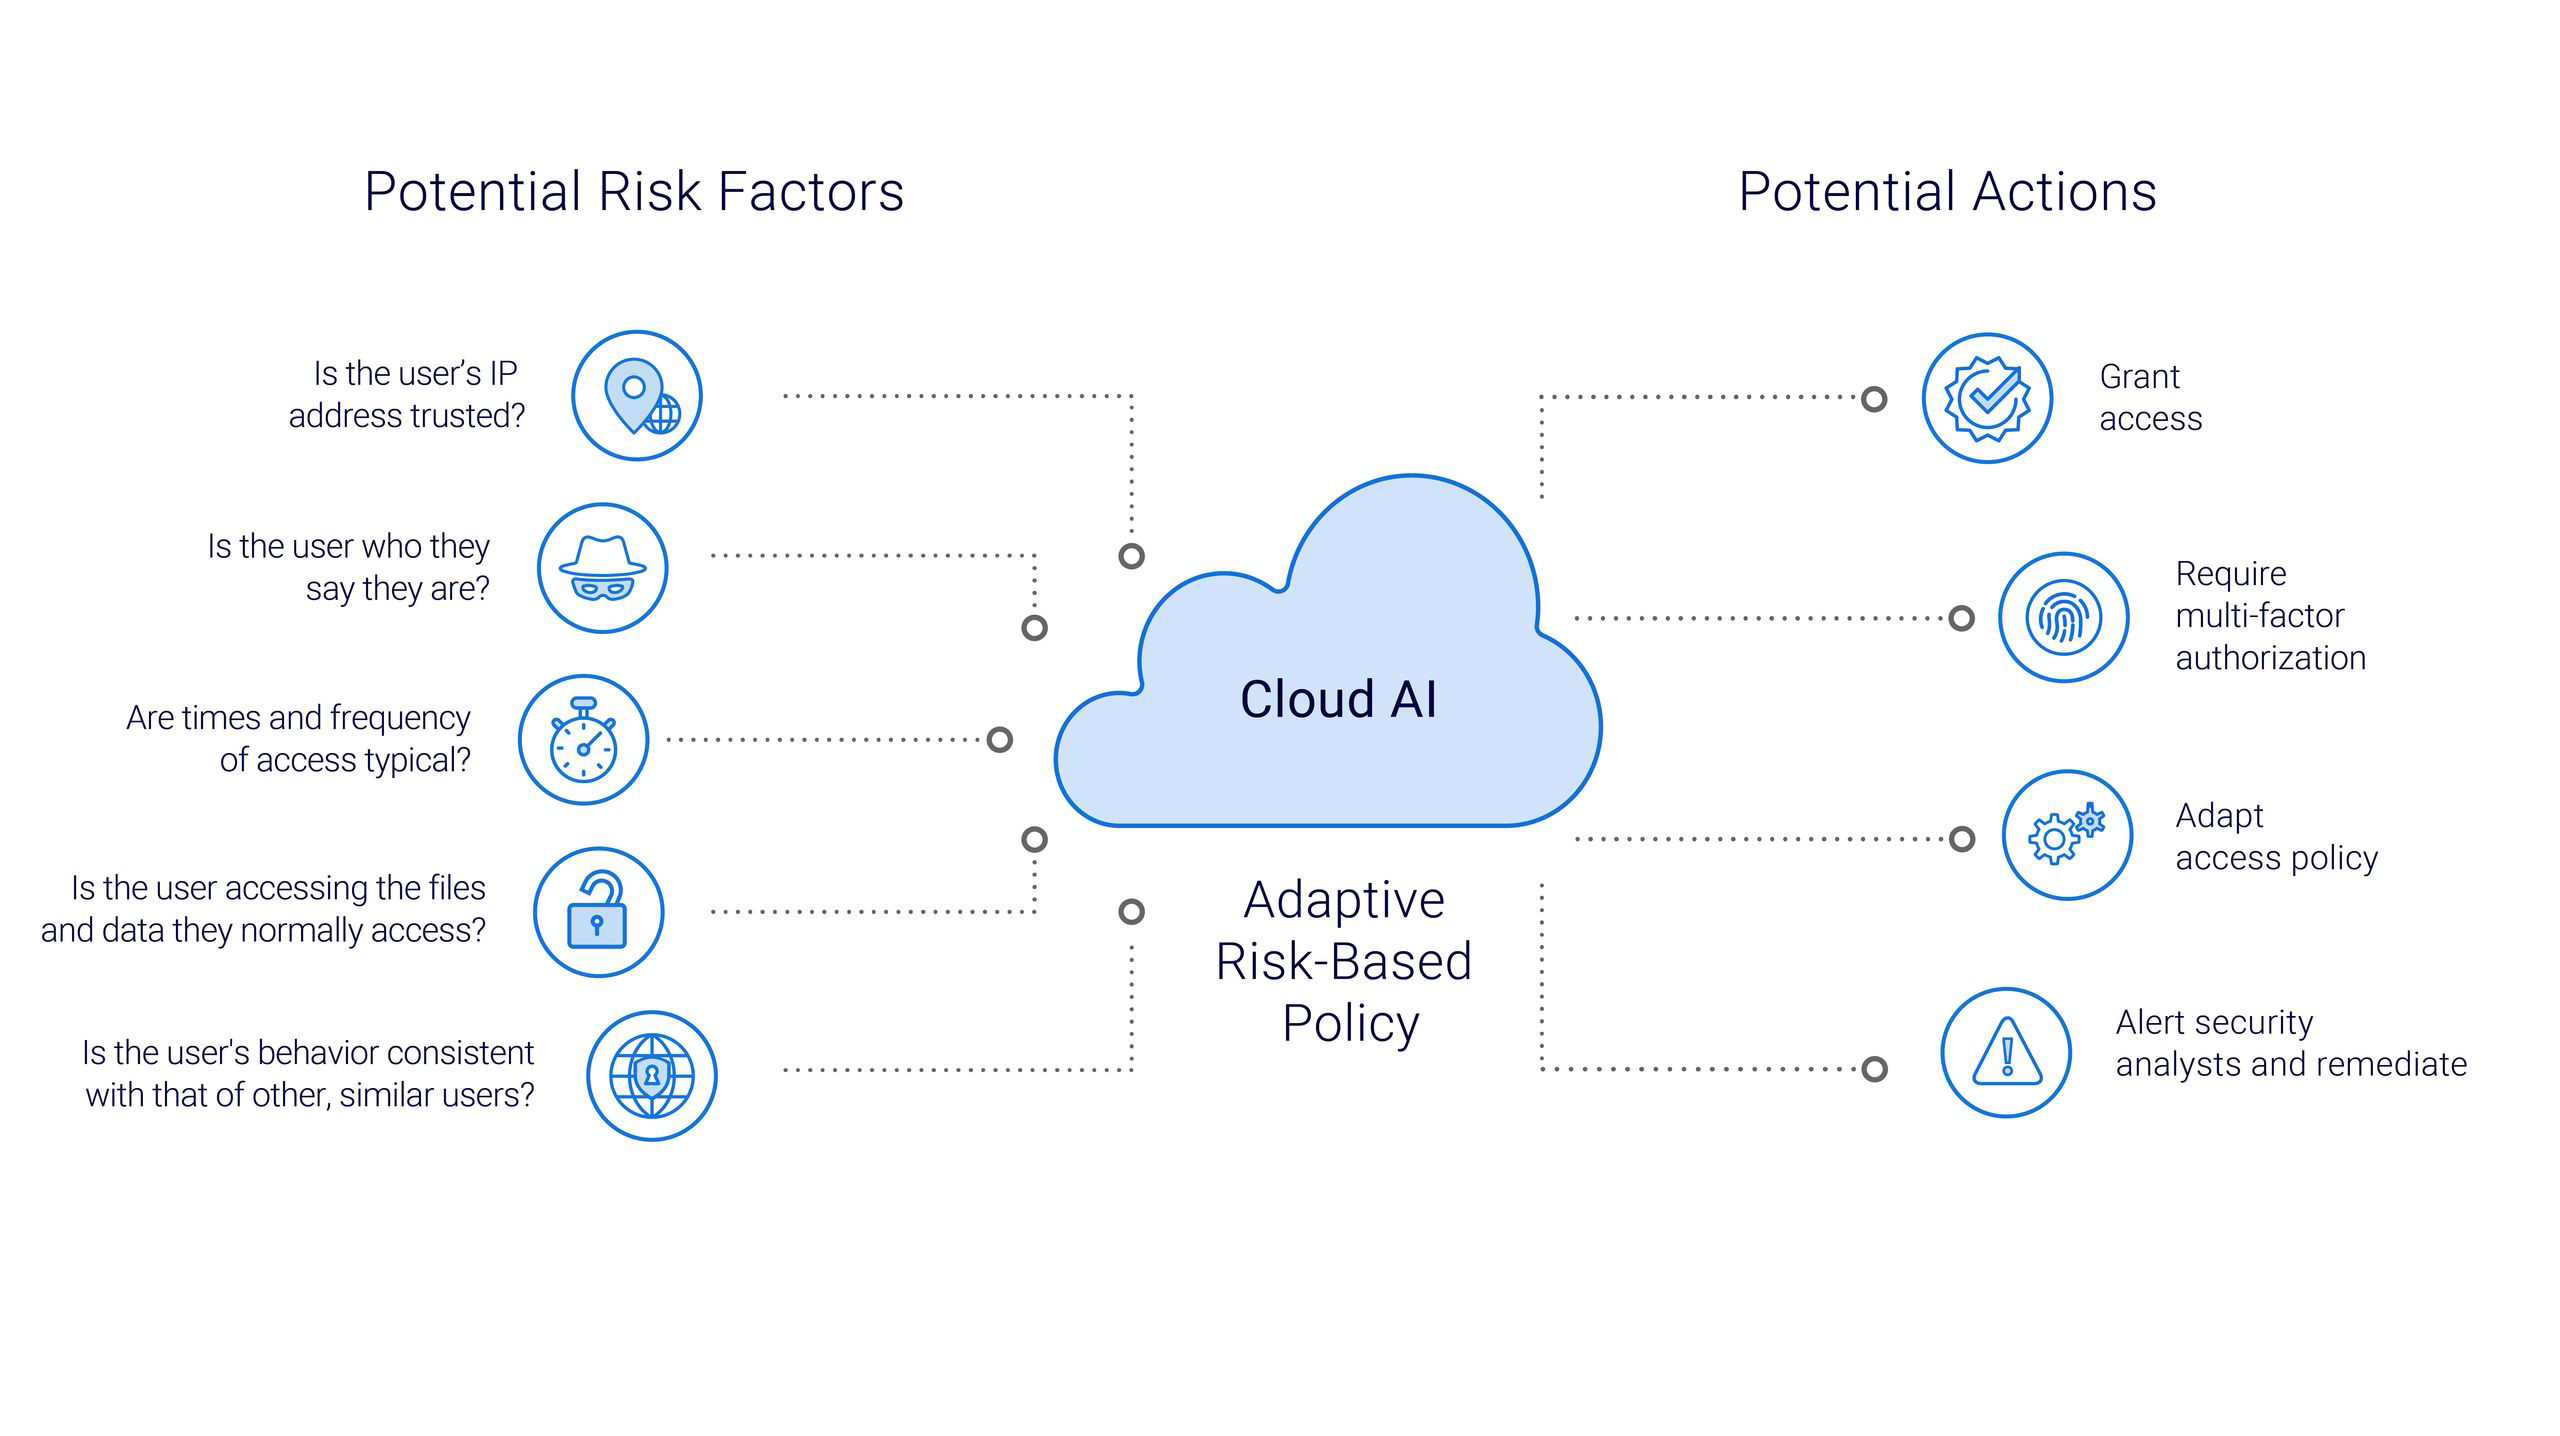 How do we use Cloud-AI to assess risk in the Network?